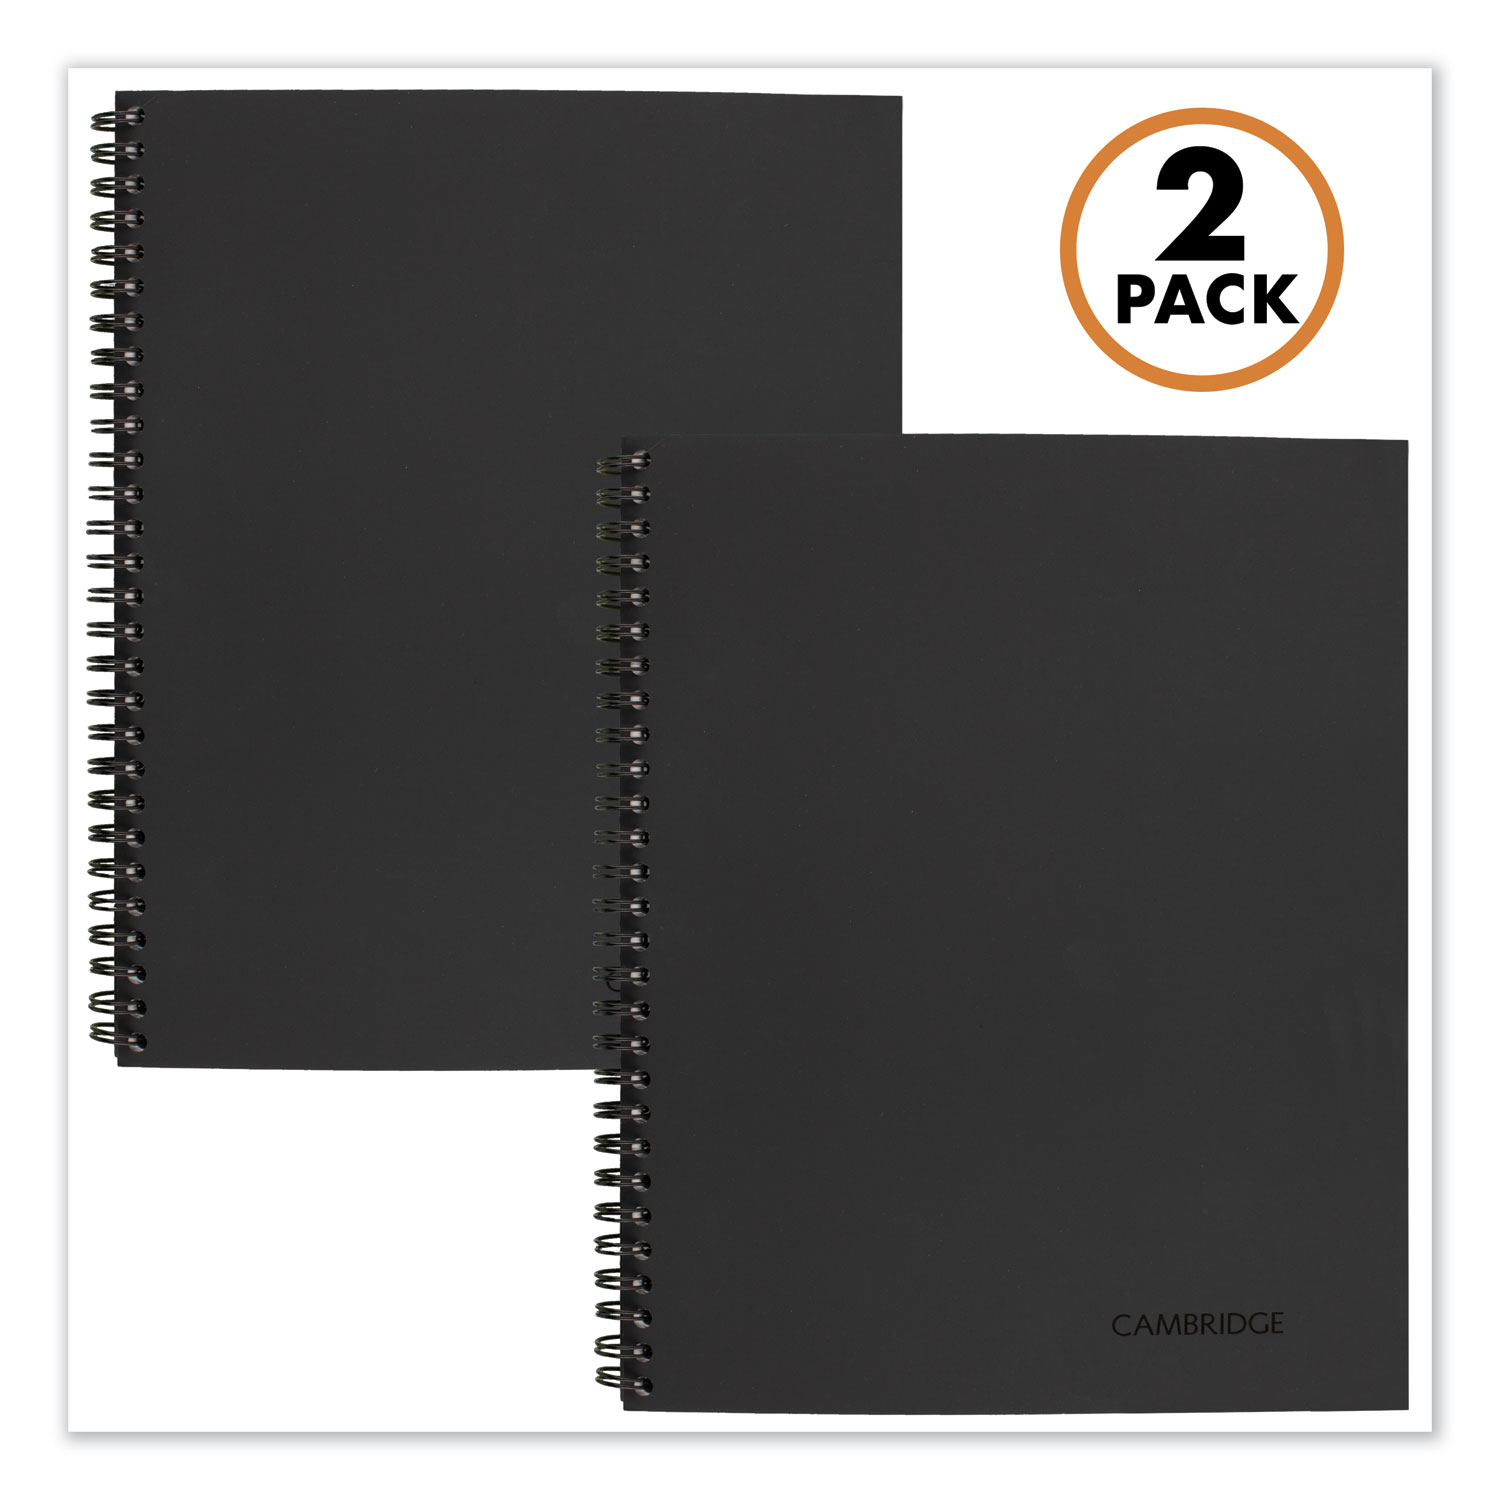  Cambridge 06341 Wirebound Meeting Notes Notebook Plus Pack, Black, 11 x 8.88, 80 Sheets, 2/Pack (MEA06341) 